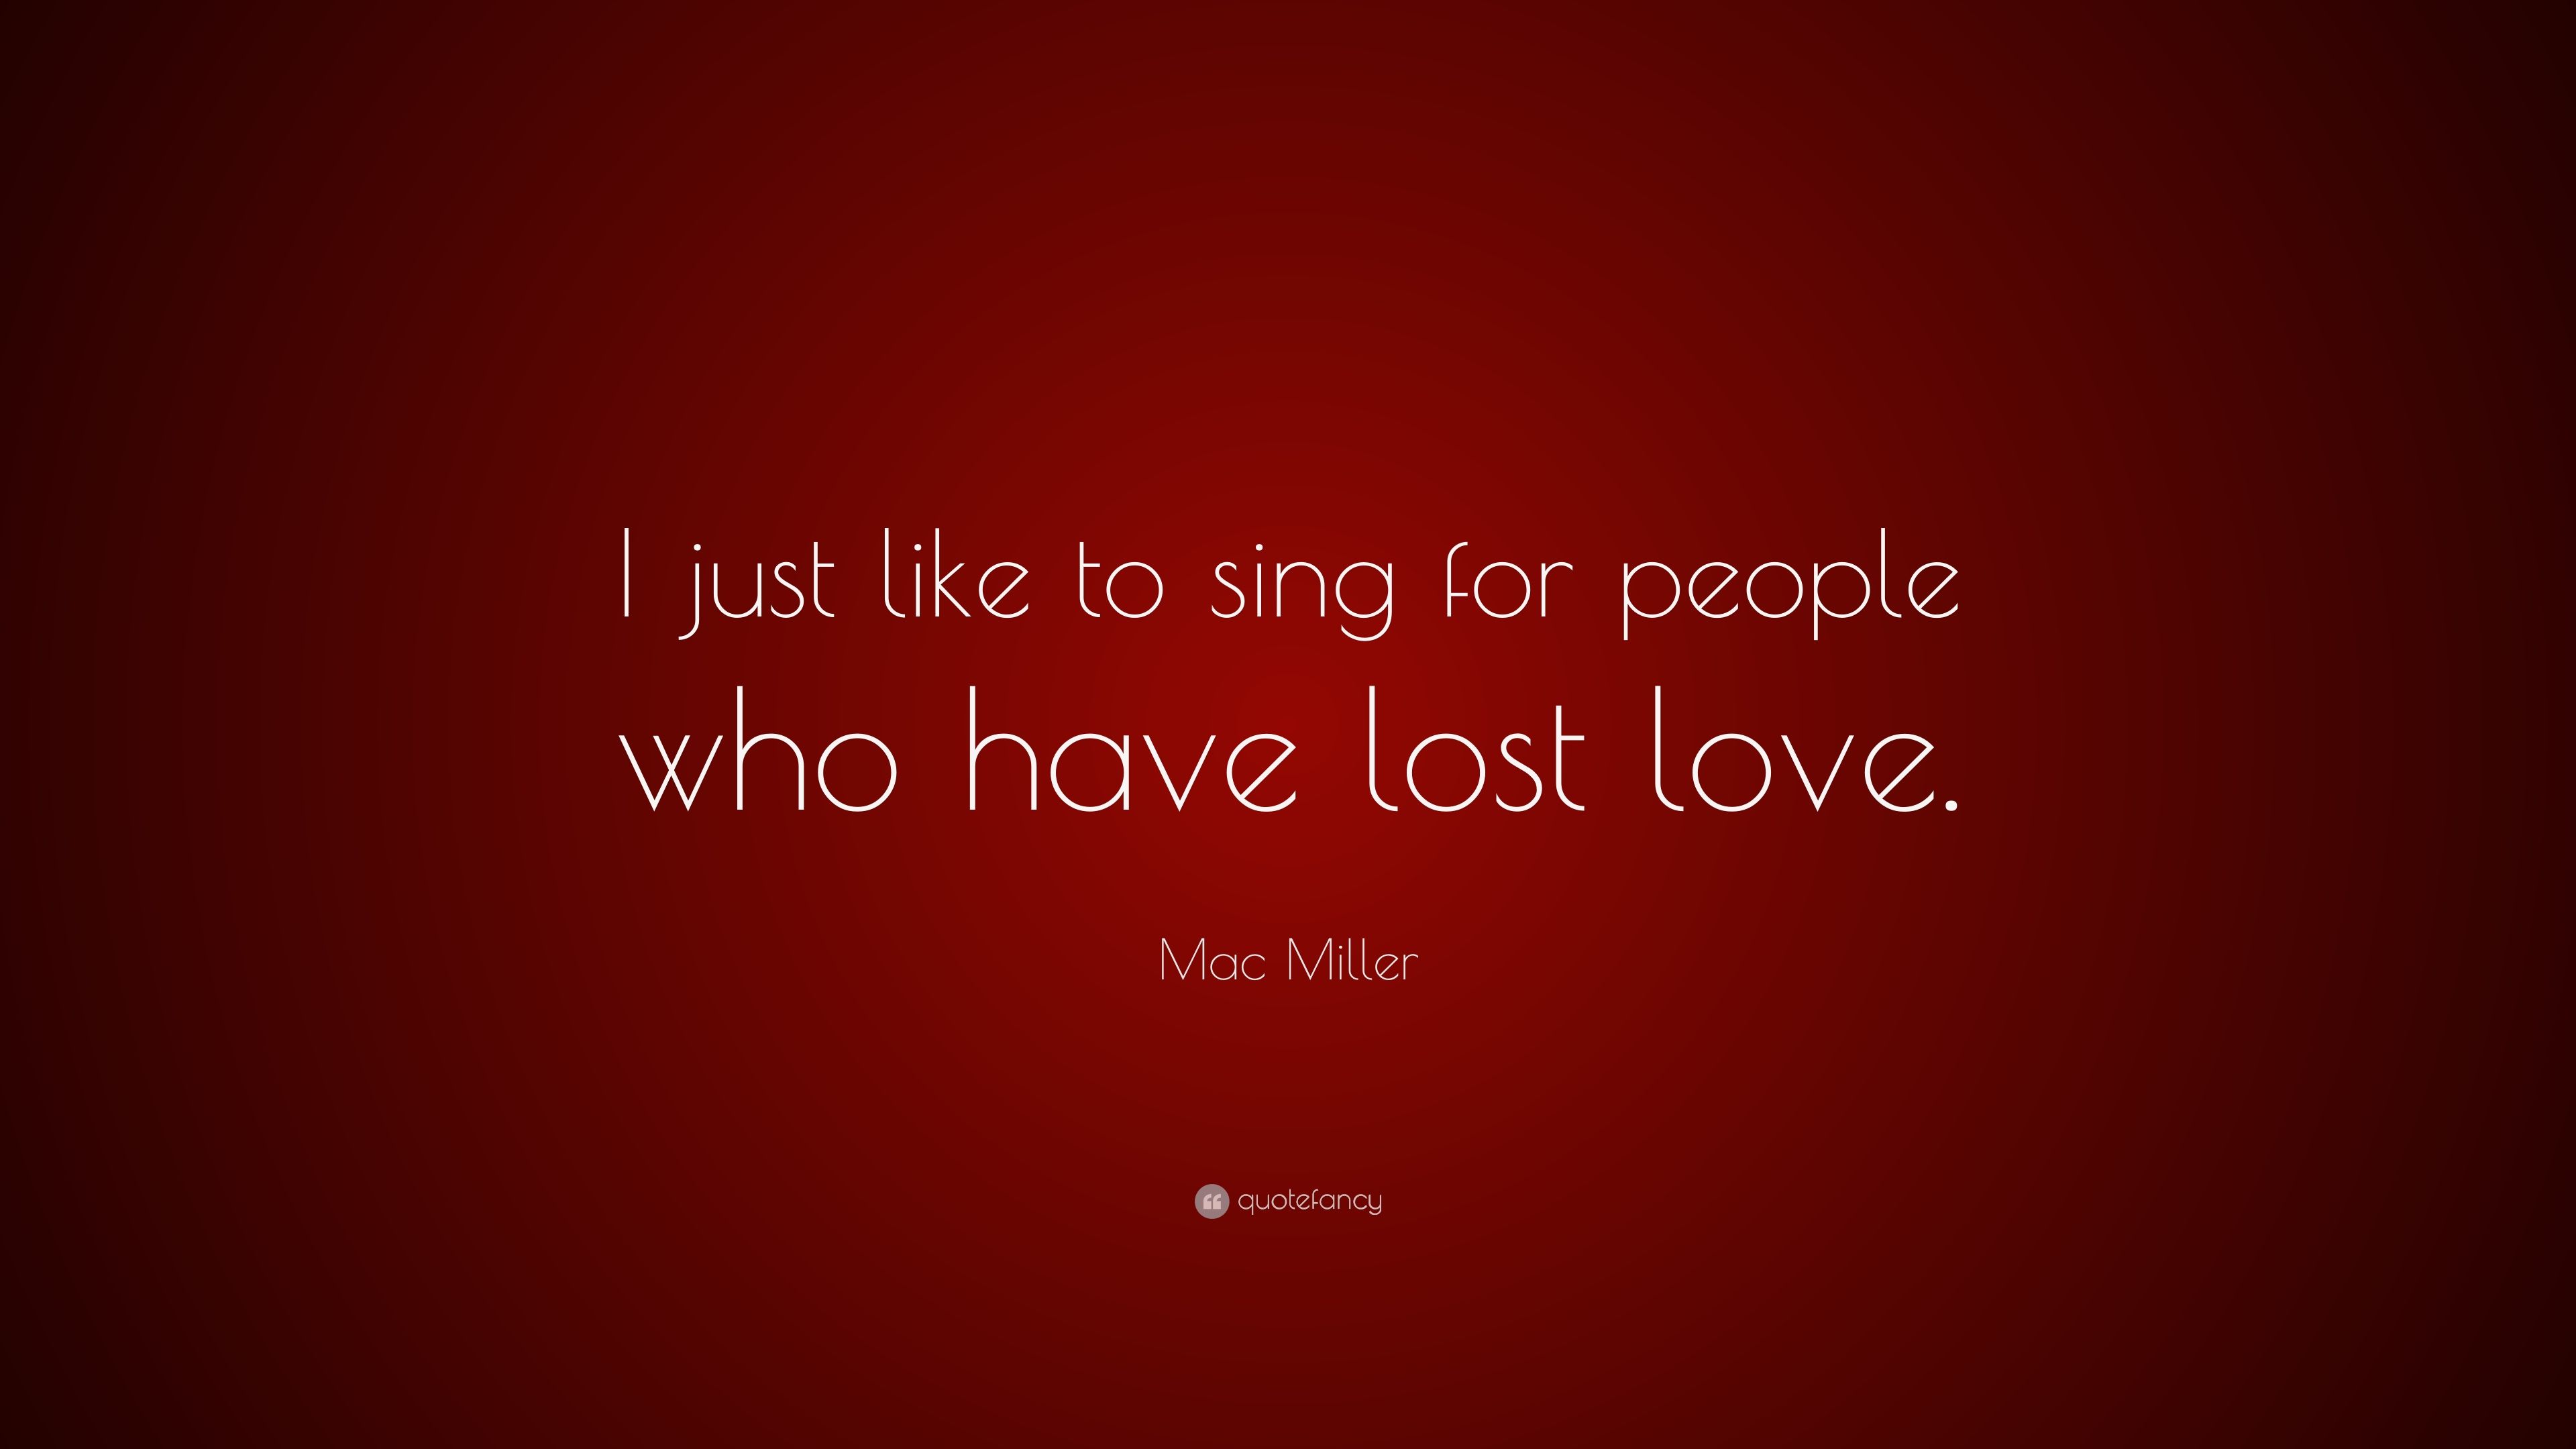 Mac Miller Quote: “I just like to sing for people who have lost love.” (7 wallpaper)